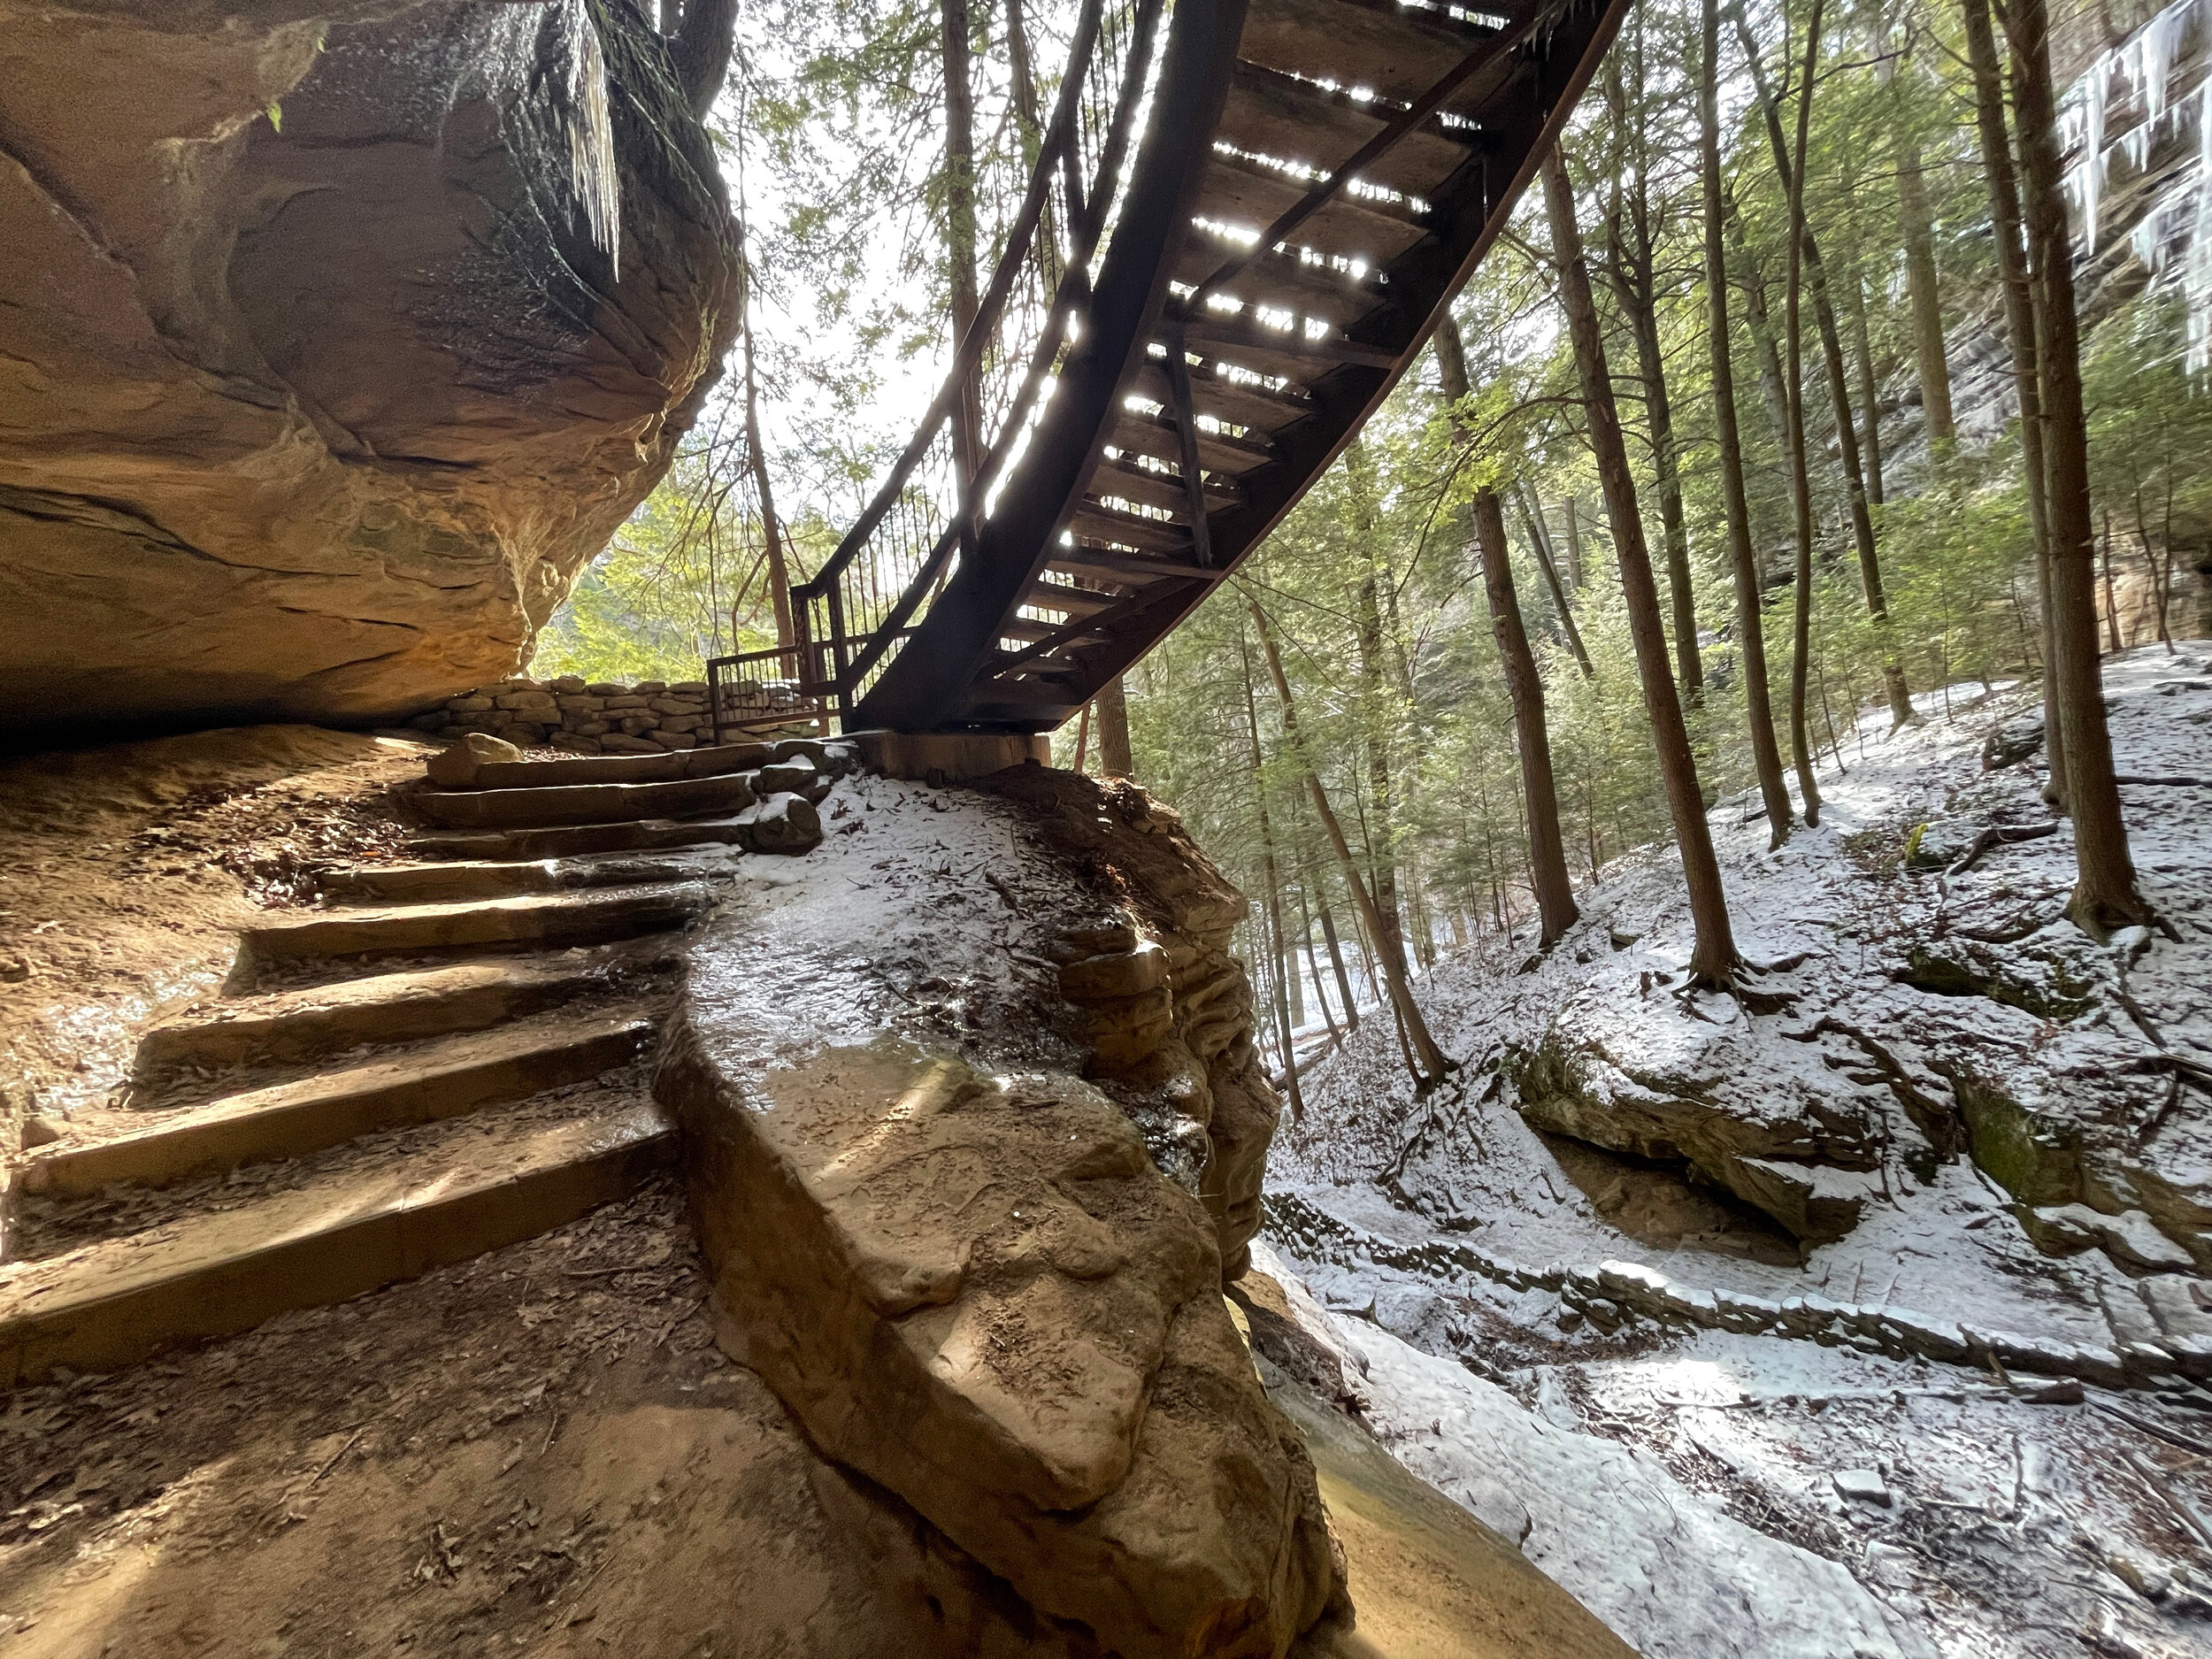 The spiral staircase leading out of the gorge near Lower Falls